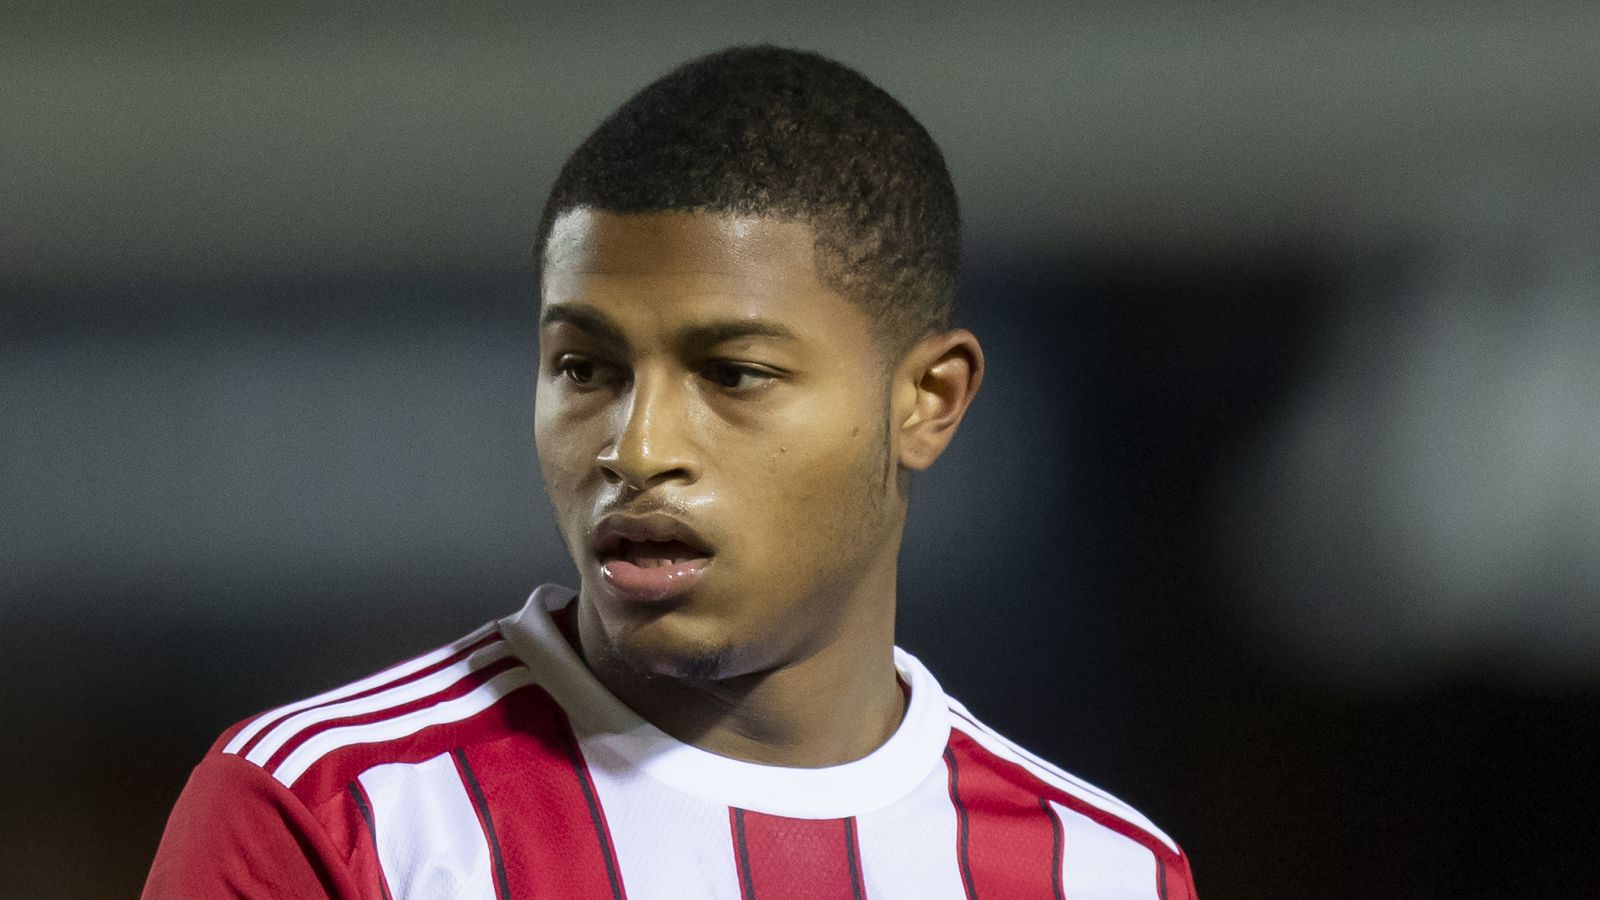 Sheffield United’s Rhian Brewster has assault charge from play-off semi-final with Nottingham Forest dropped by prosecutors